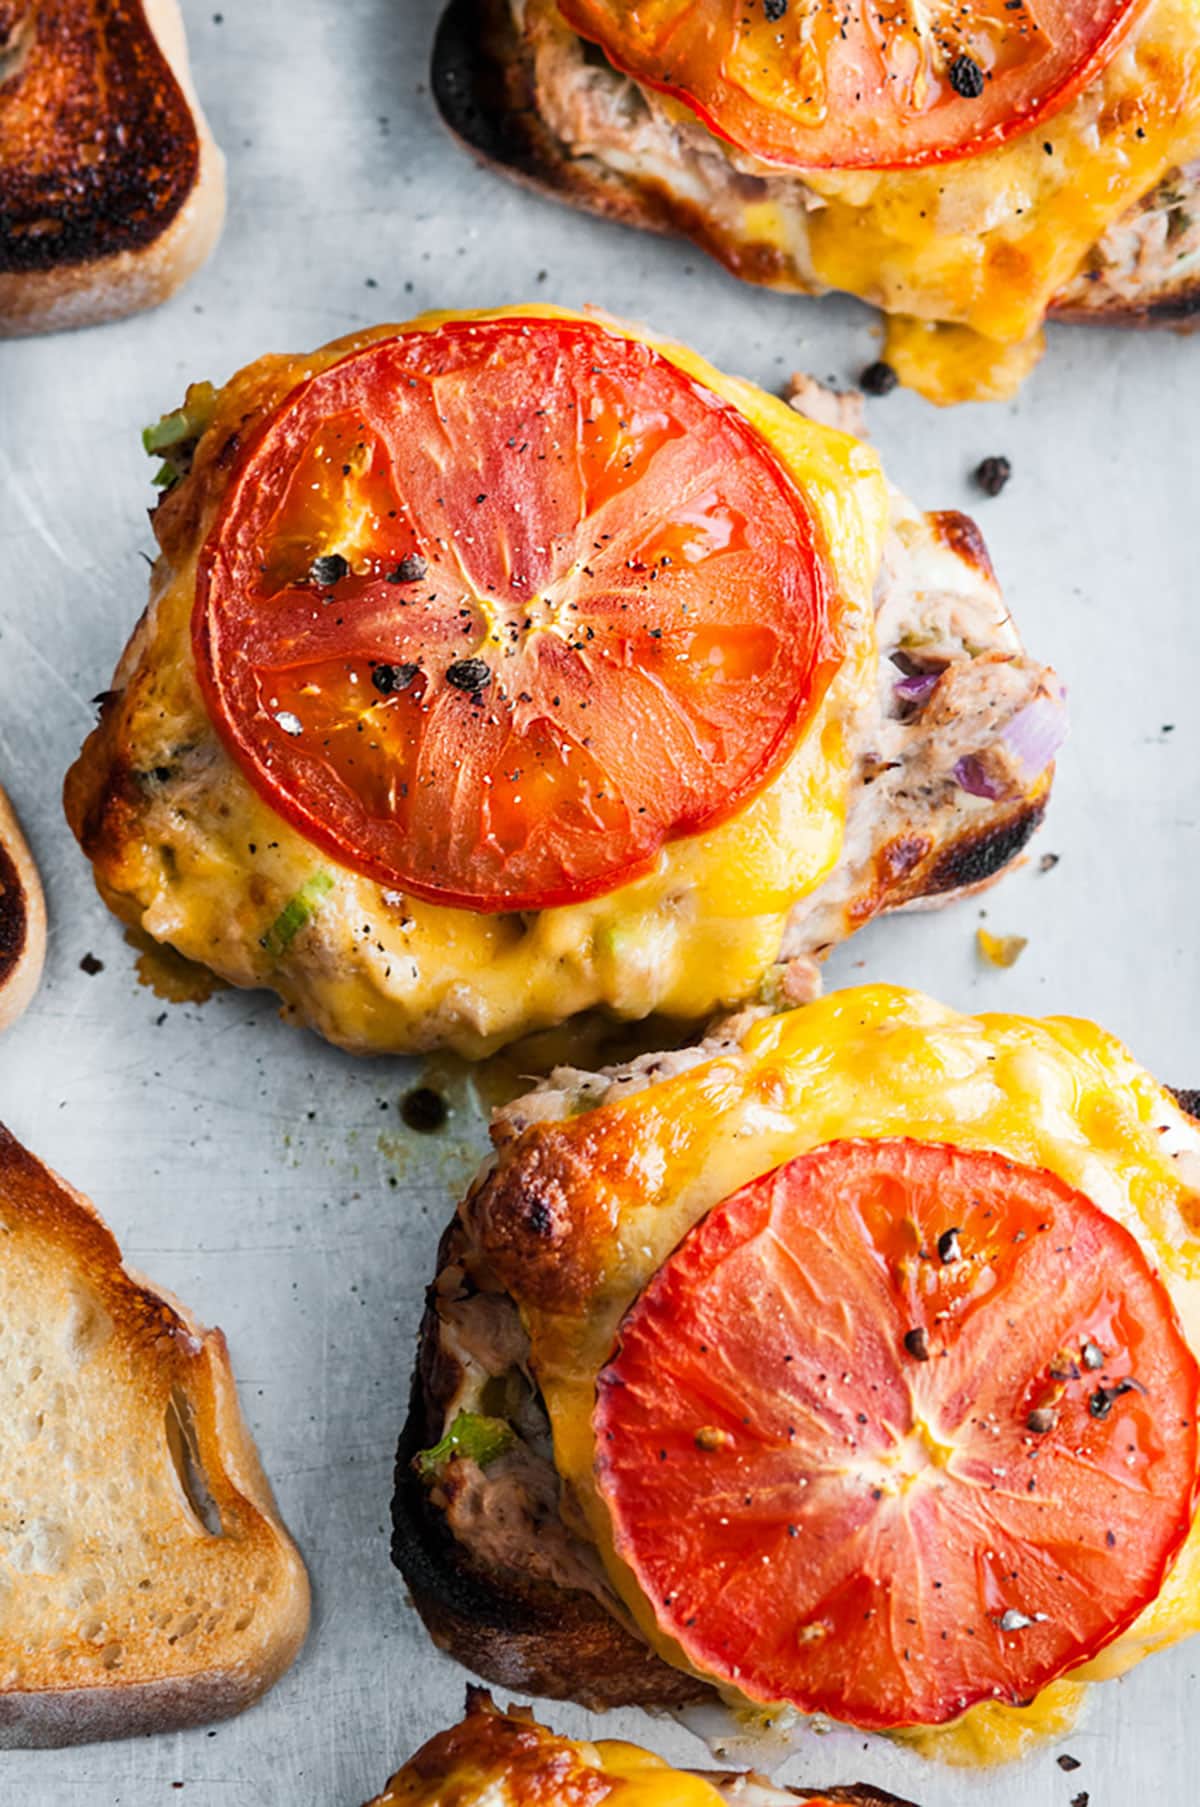 Sheet Pan Sourdough Tuna Melts open faced sandwich style broiled on gray baking sheet with melted